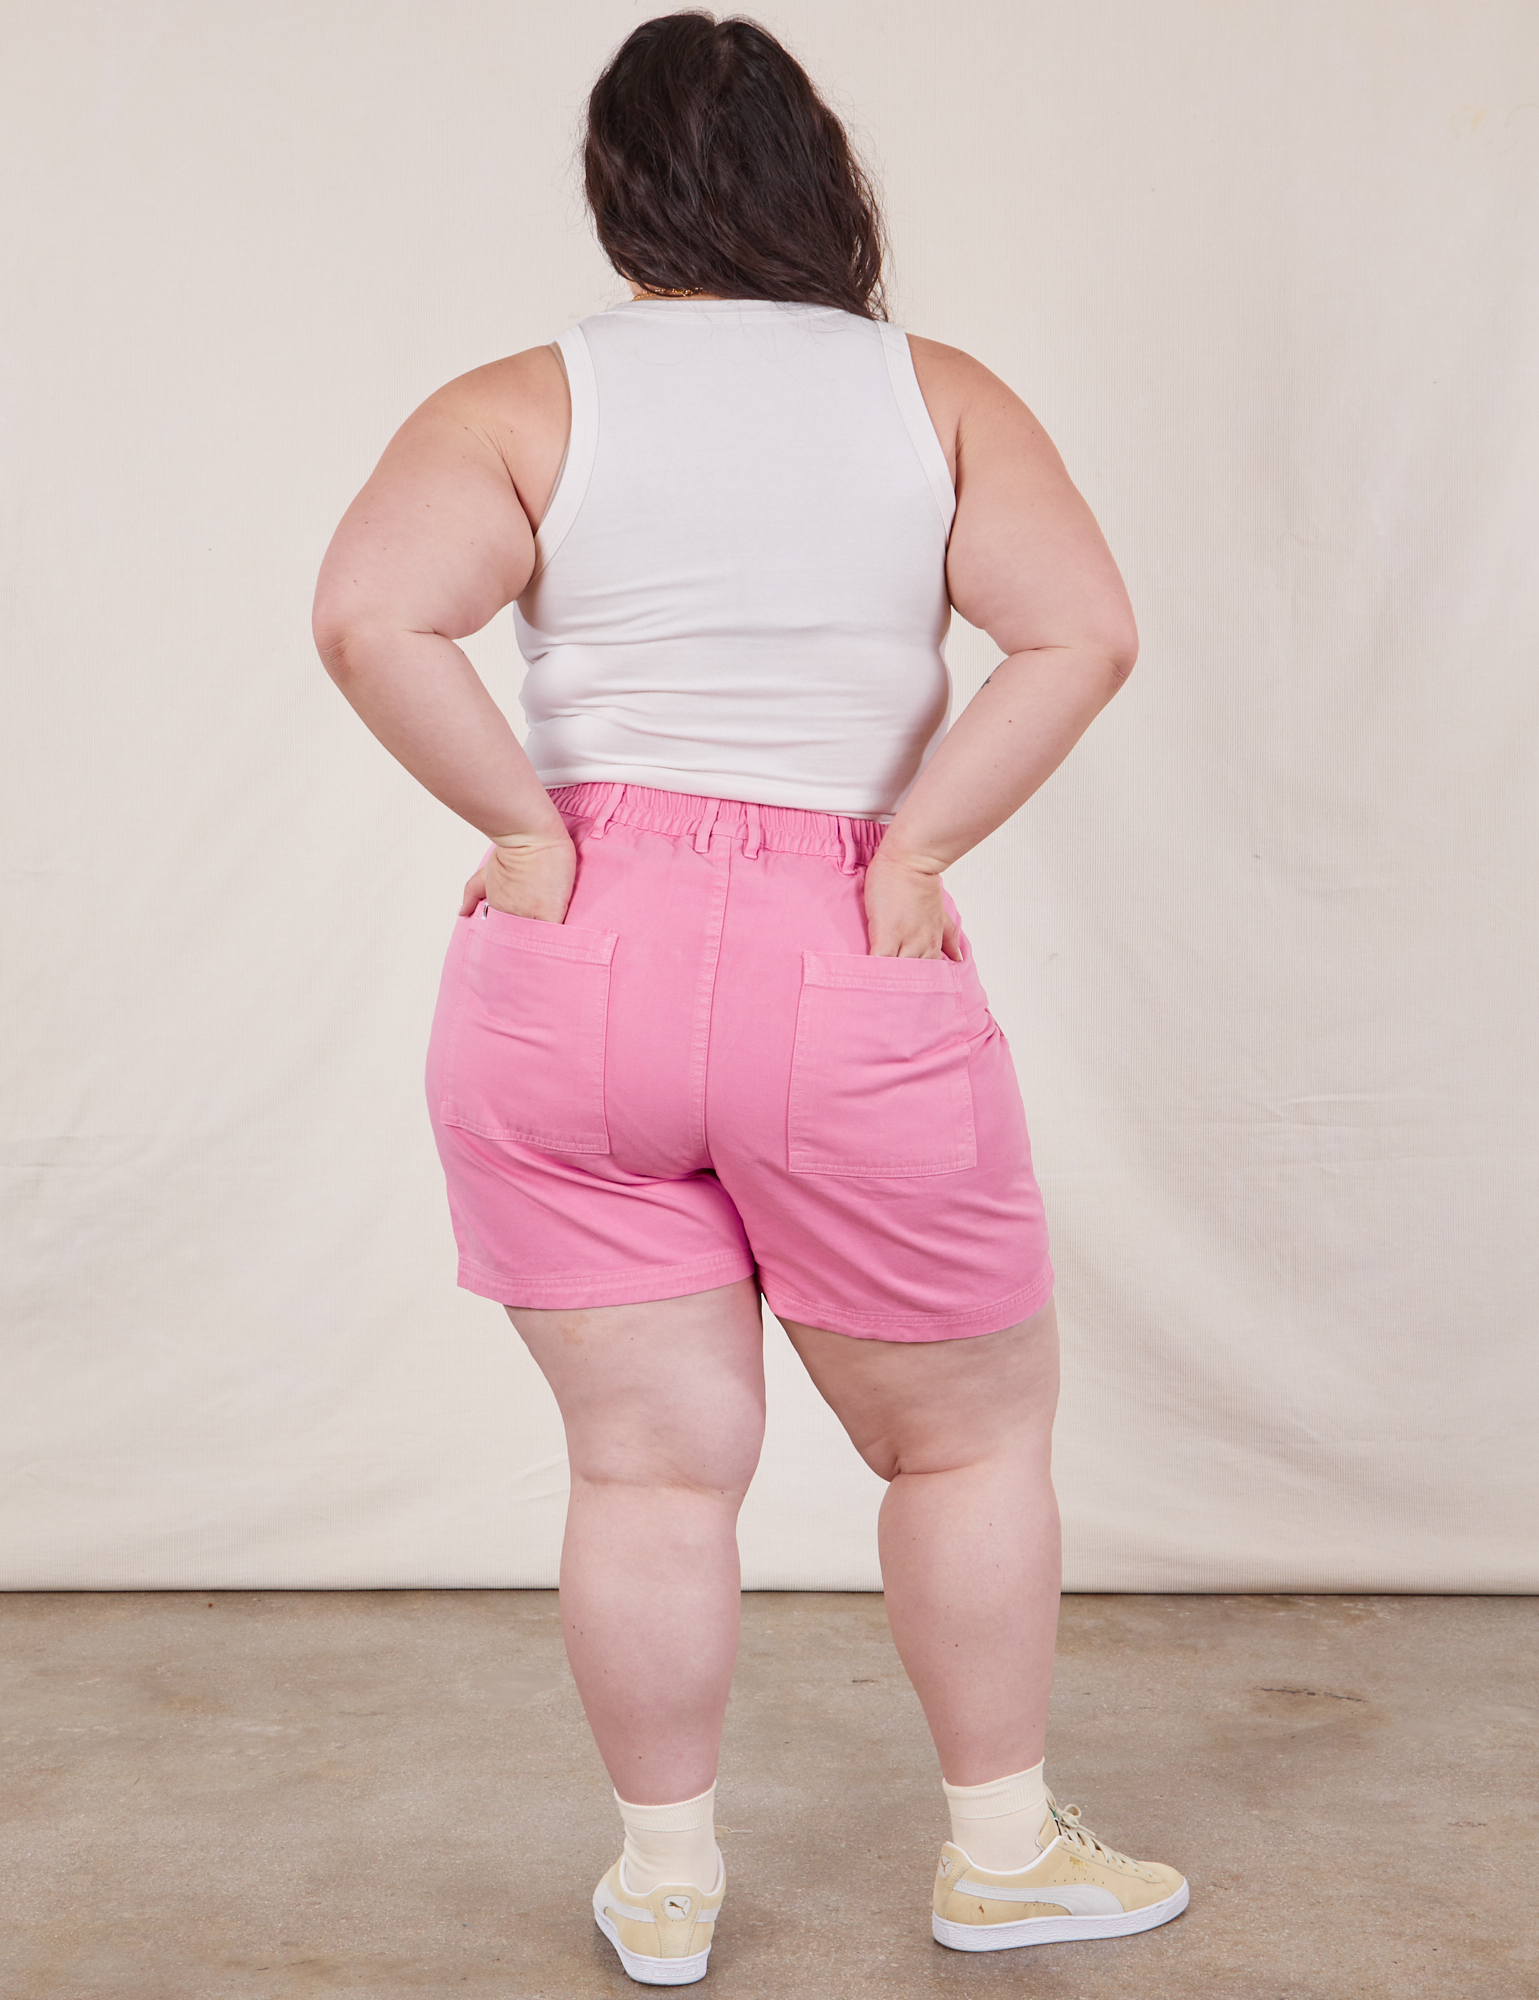 Back view of Classic Work Shorts in Bubblegum Pink and Cropped Tank Top in vintage tee off-white on Ashley